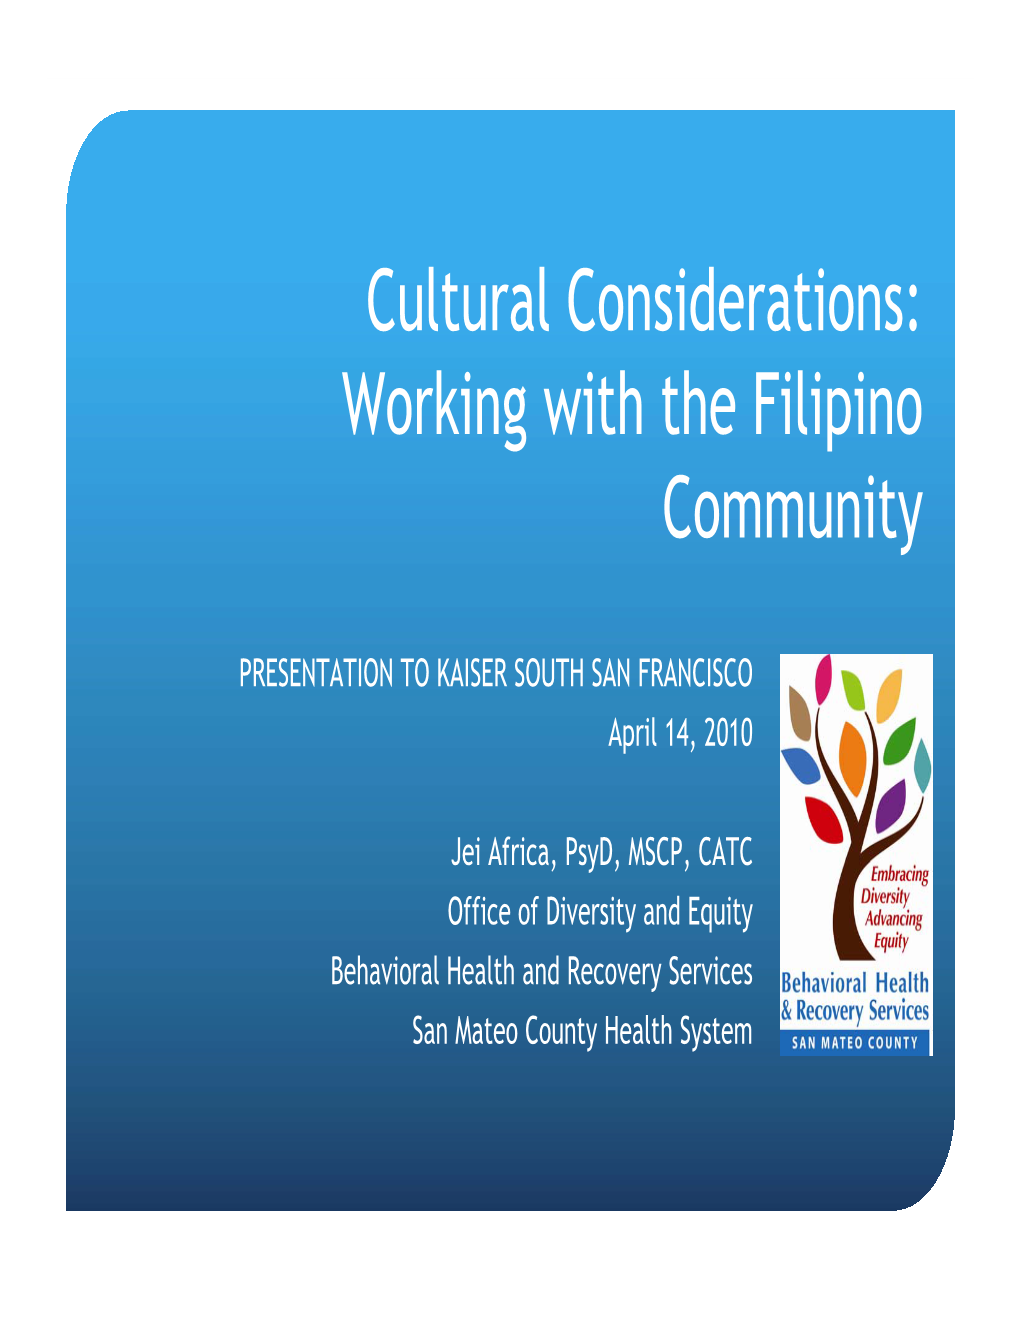 Cultural Considerations: Working with the Filipino Community